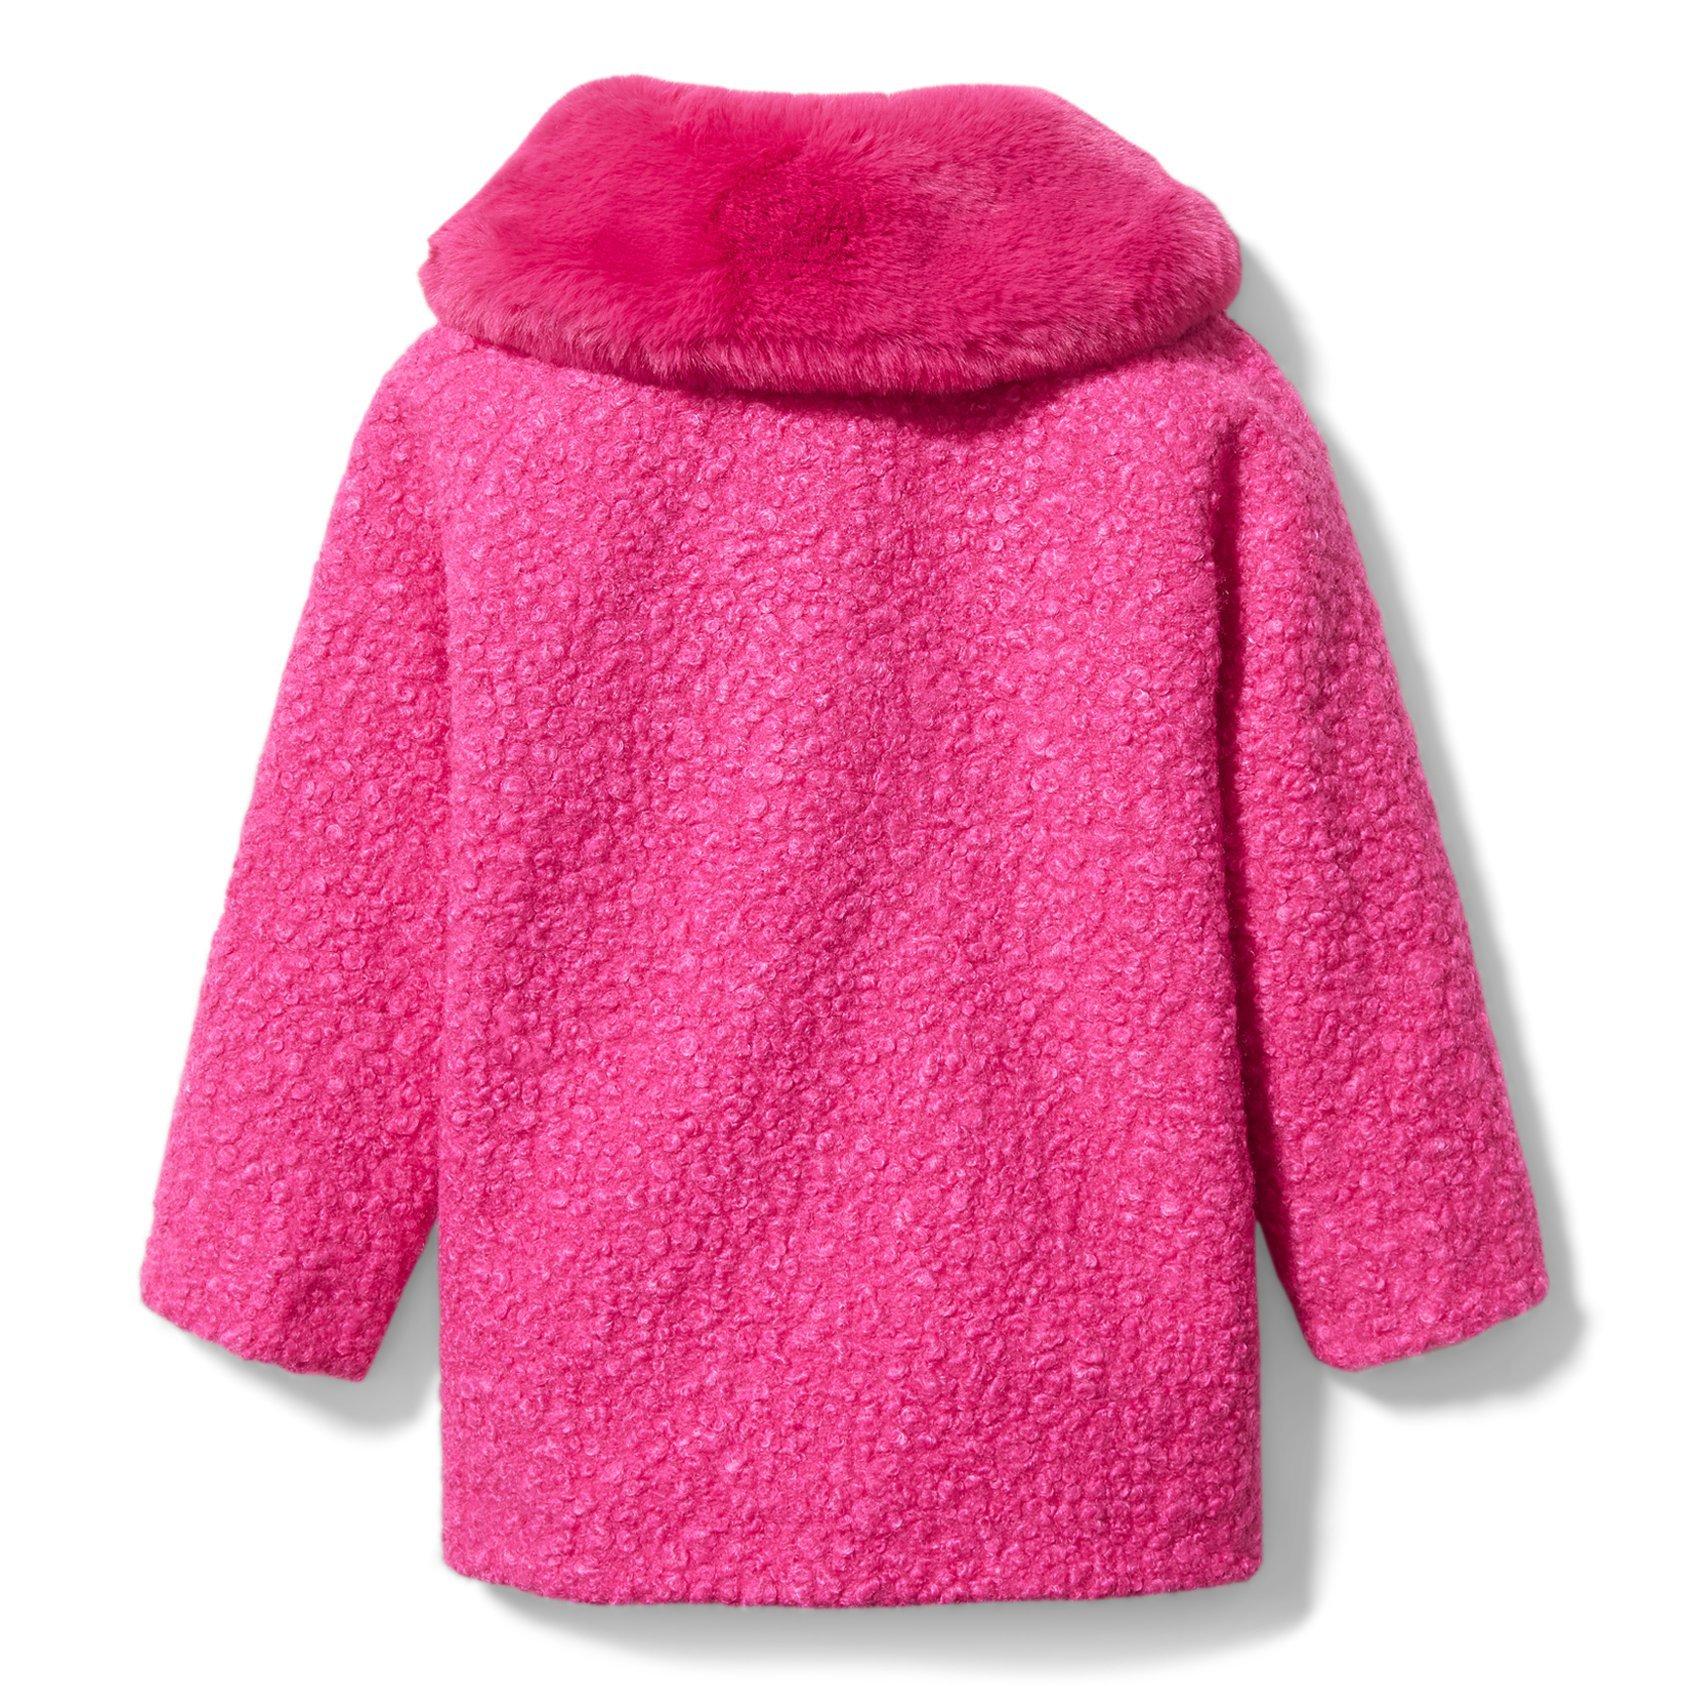 Girl Pink Peacock Sherpa Faux Fur Collar Coat by Janie and Jack